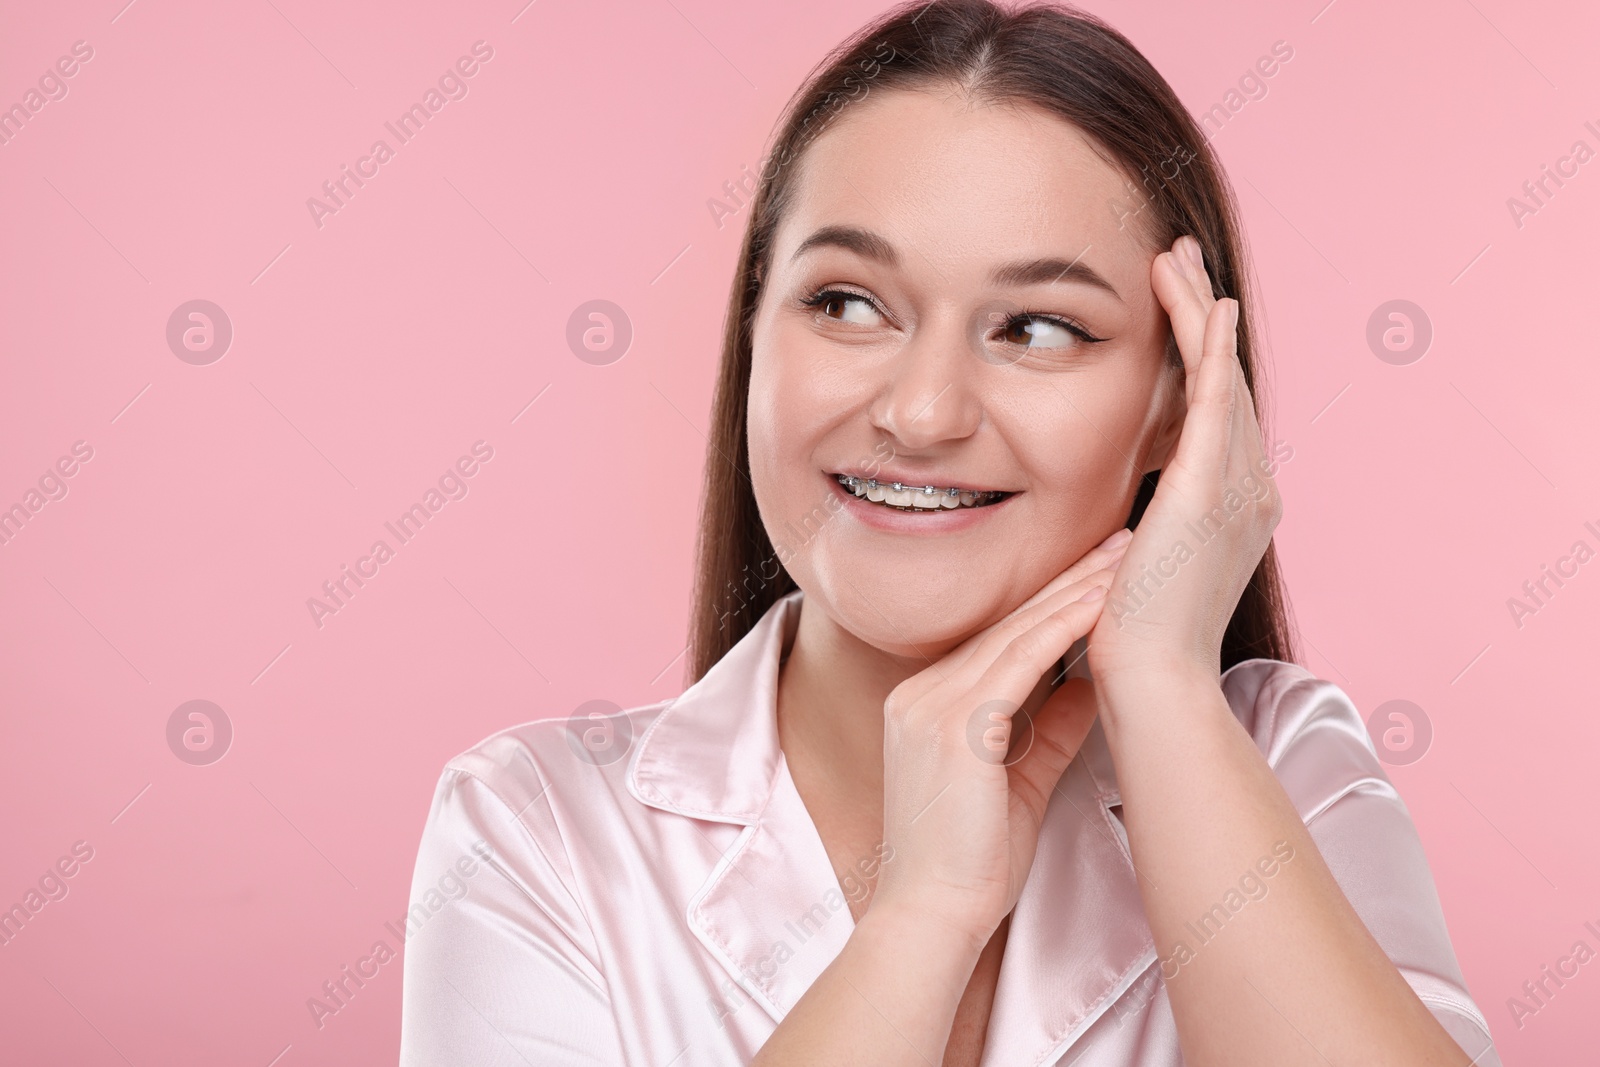 Photo of Smiling woman with dental braces on pink background. Space for text